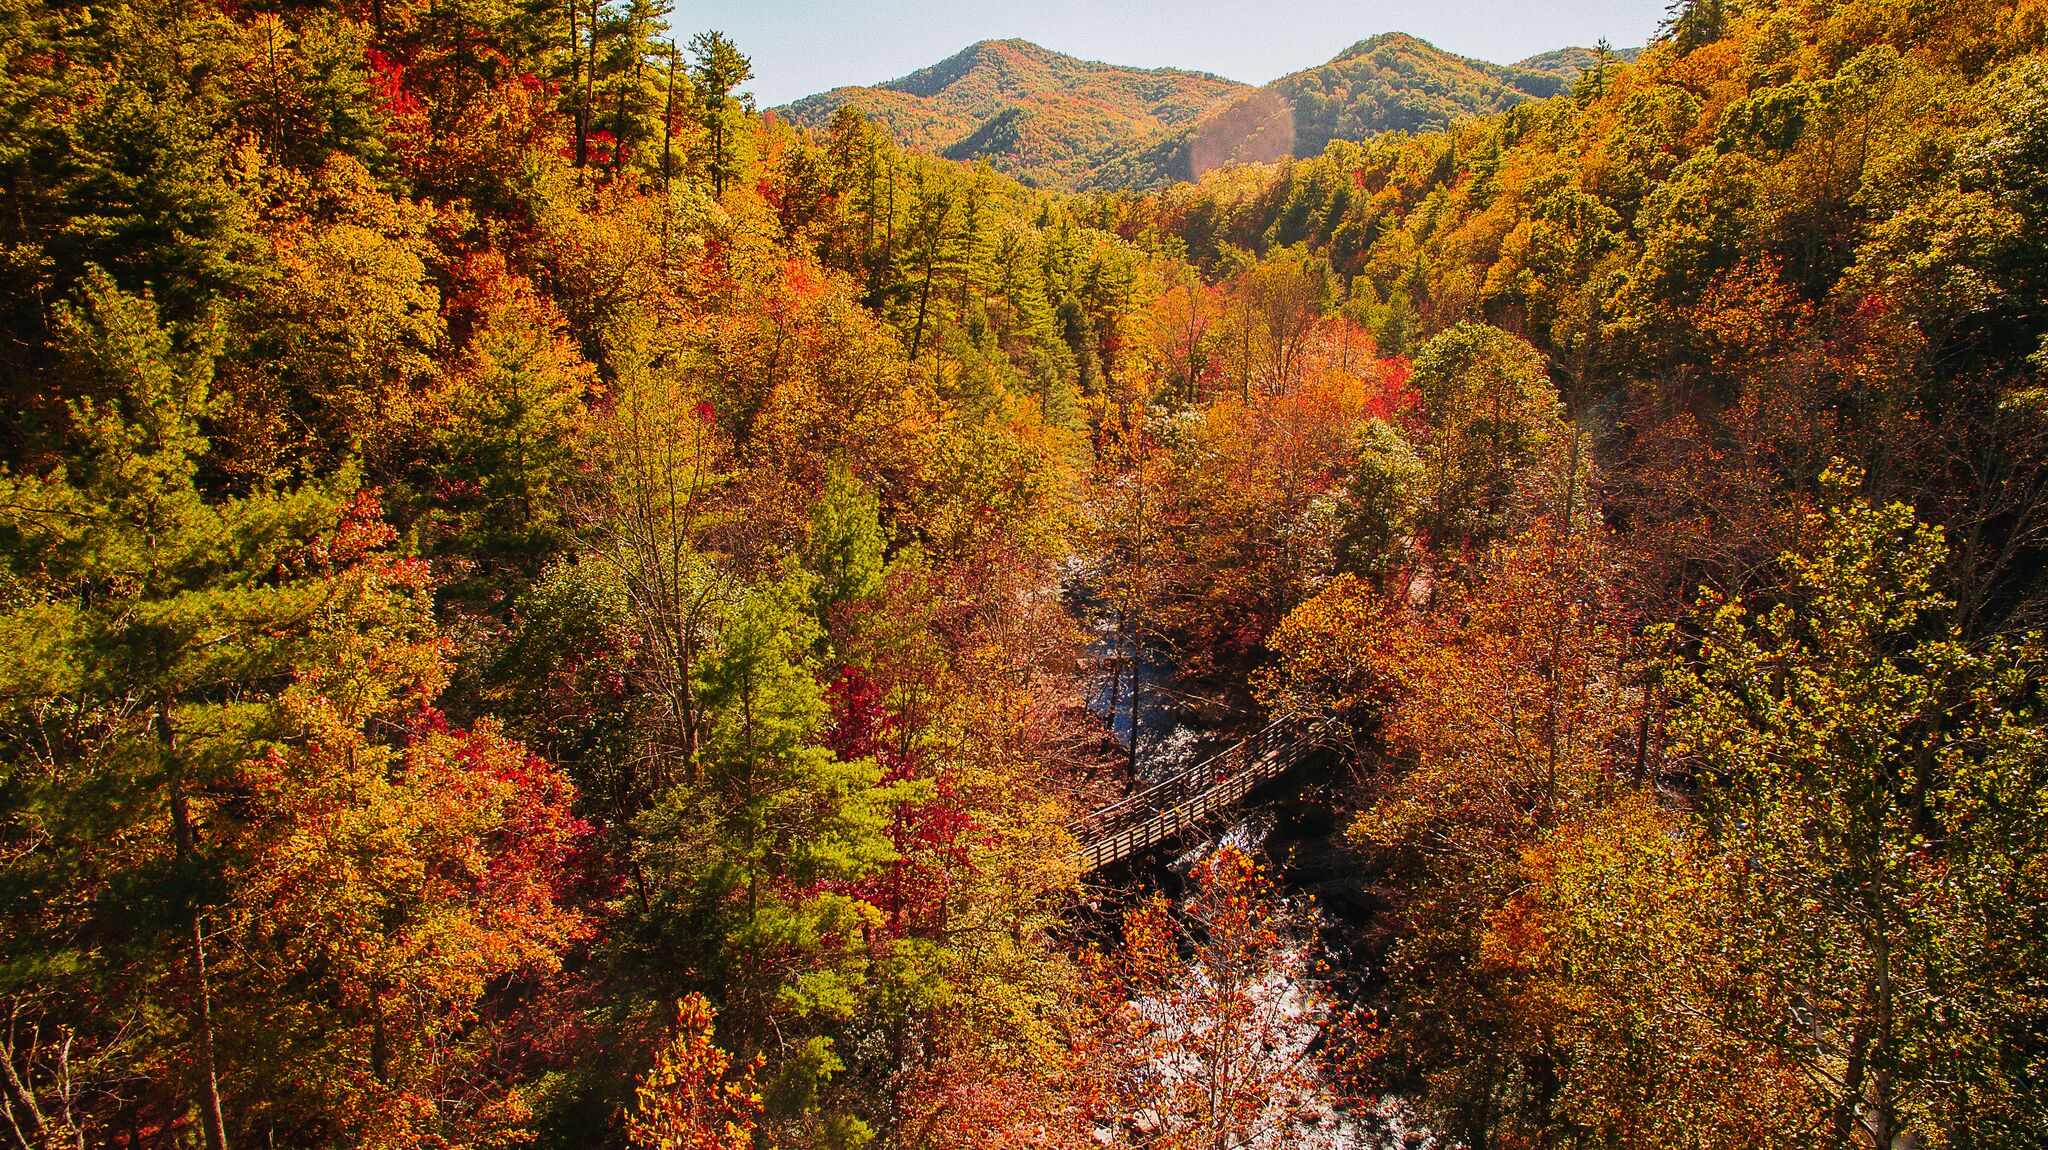 Looking for a Fall Getaway? Check out This Small Mountain Town ...